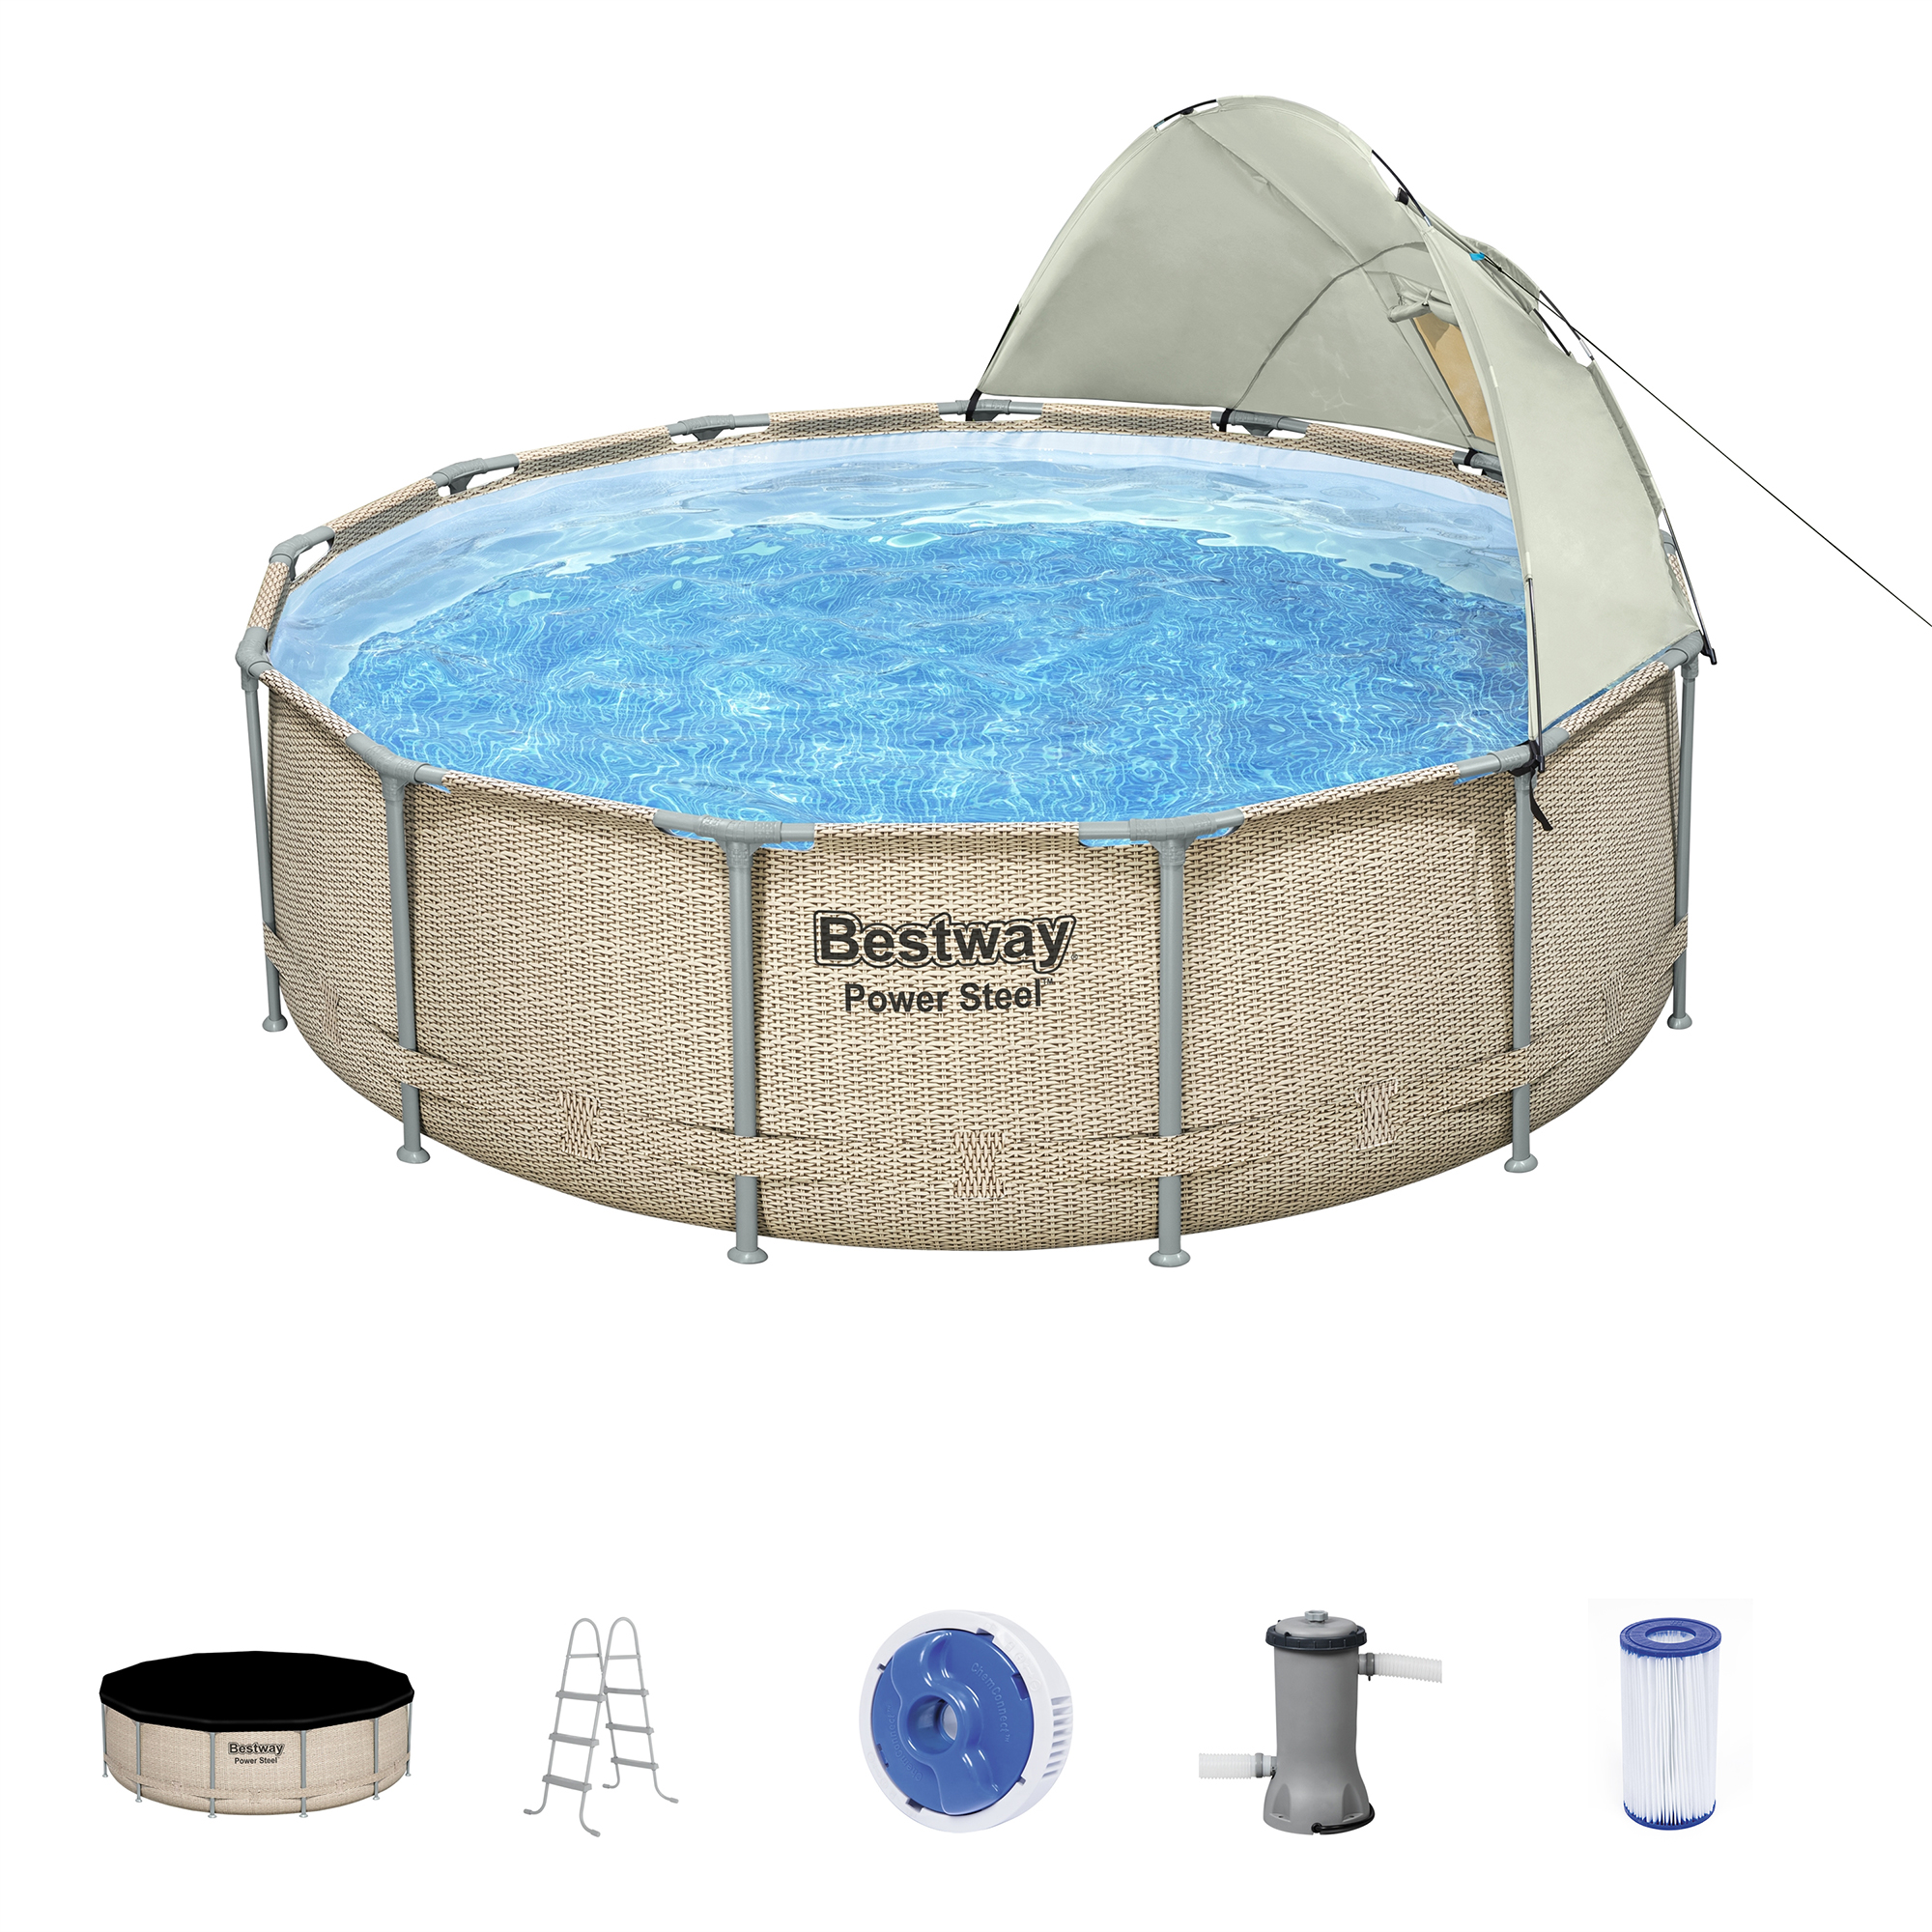 Bestway Power Steel 13' x 42" Above Ground Swimming Pool Set with Canopy - image 1 of 12